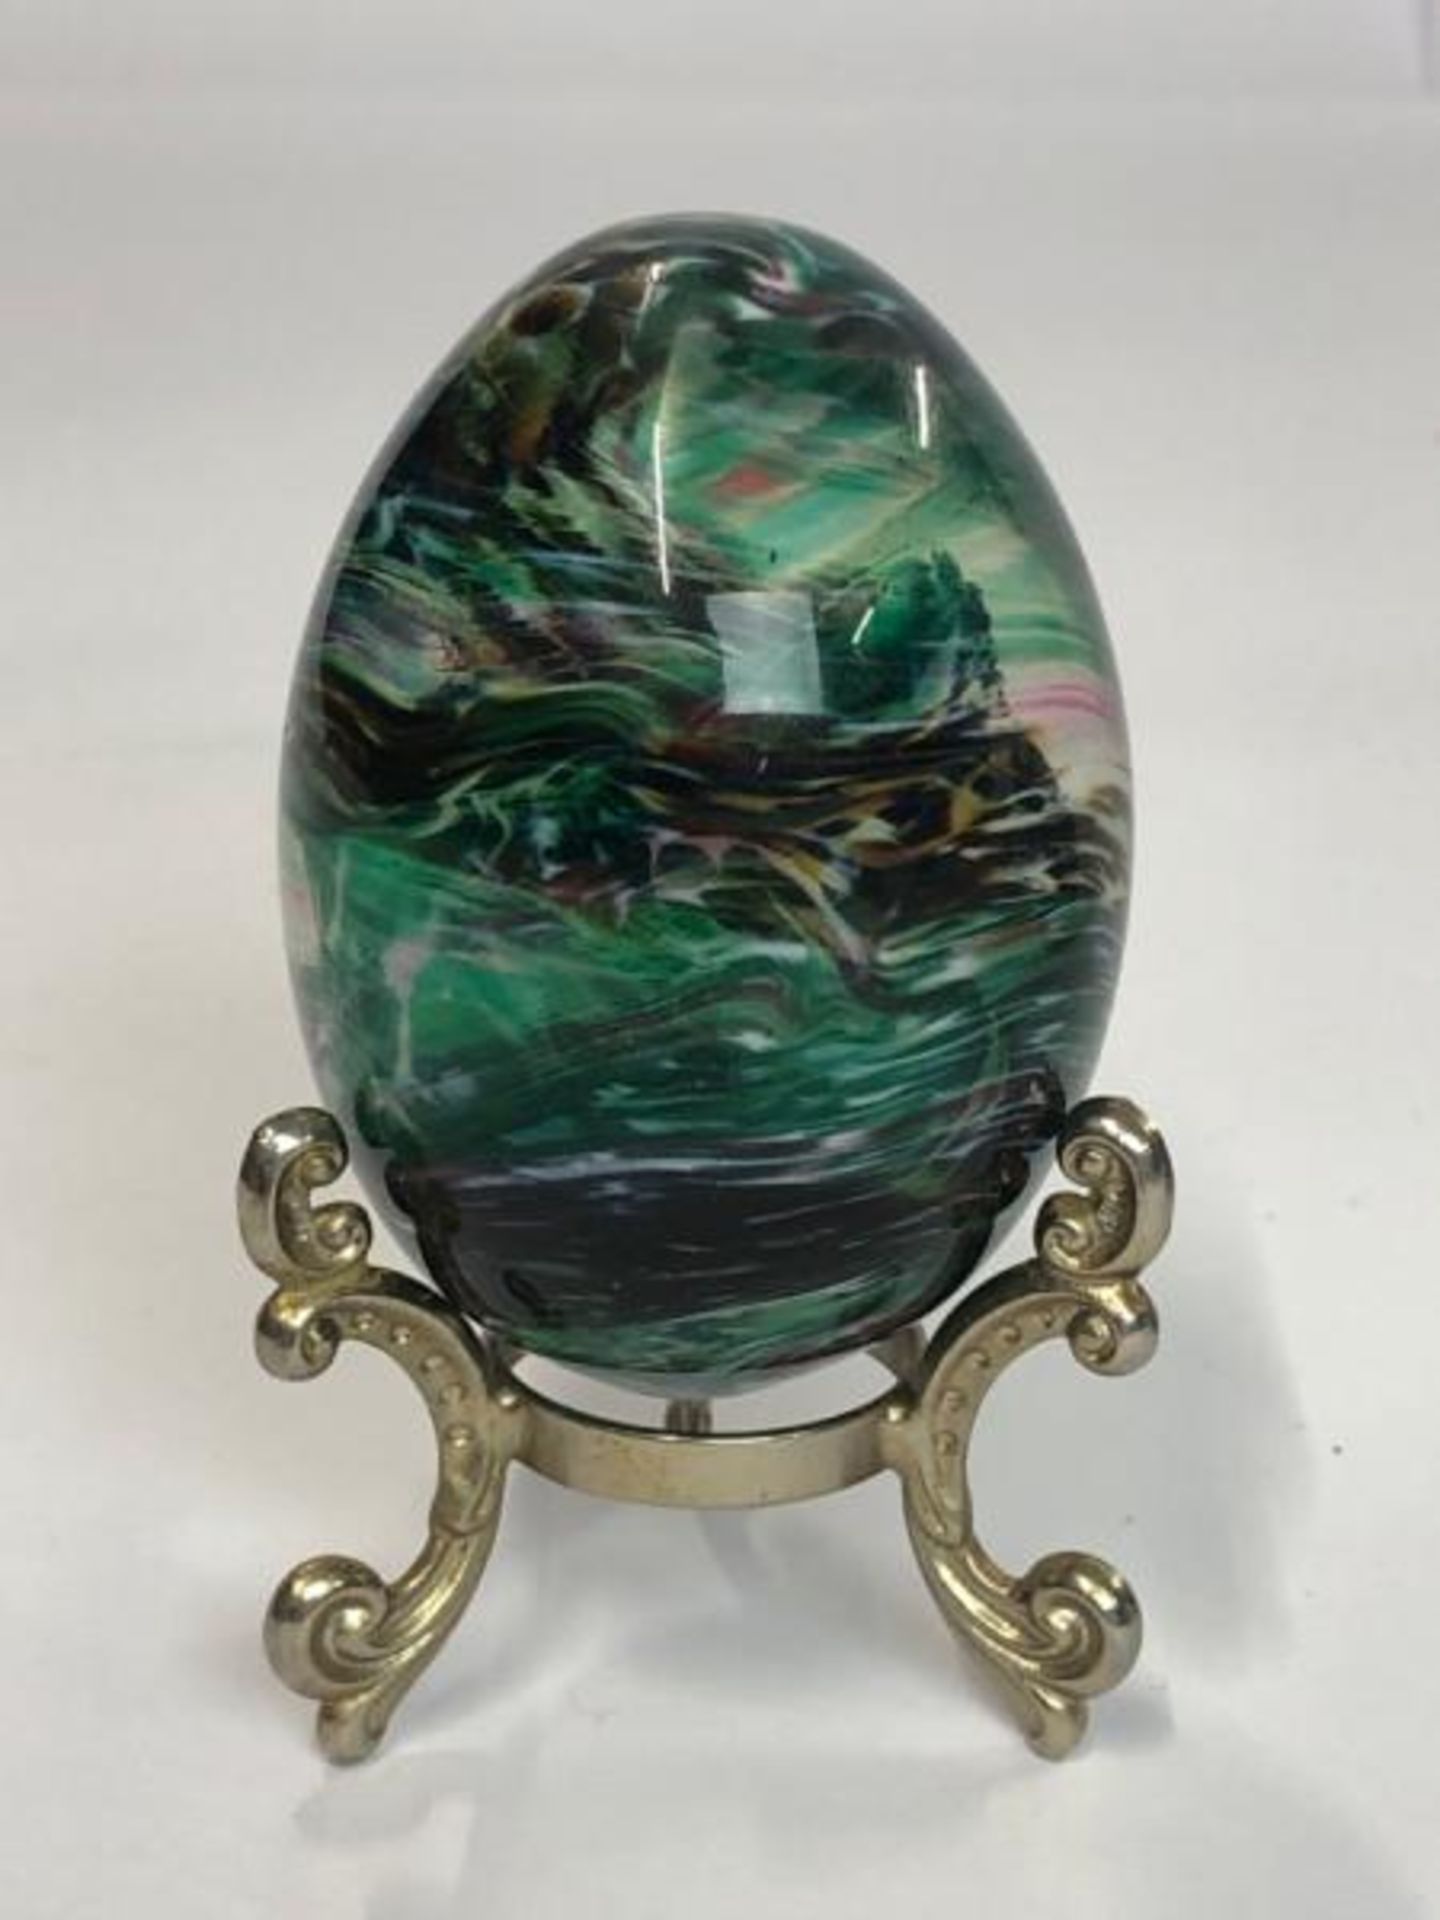 Decorative glass including, Snail, Sea Lion, Mushroom and egg with stand (4) / AN7 - Image 2 of 6